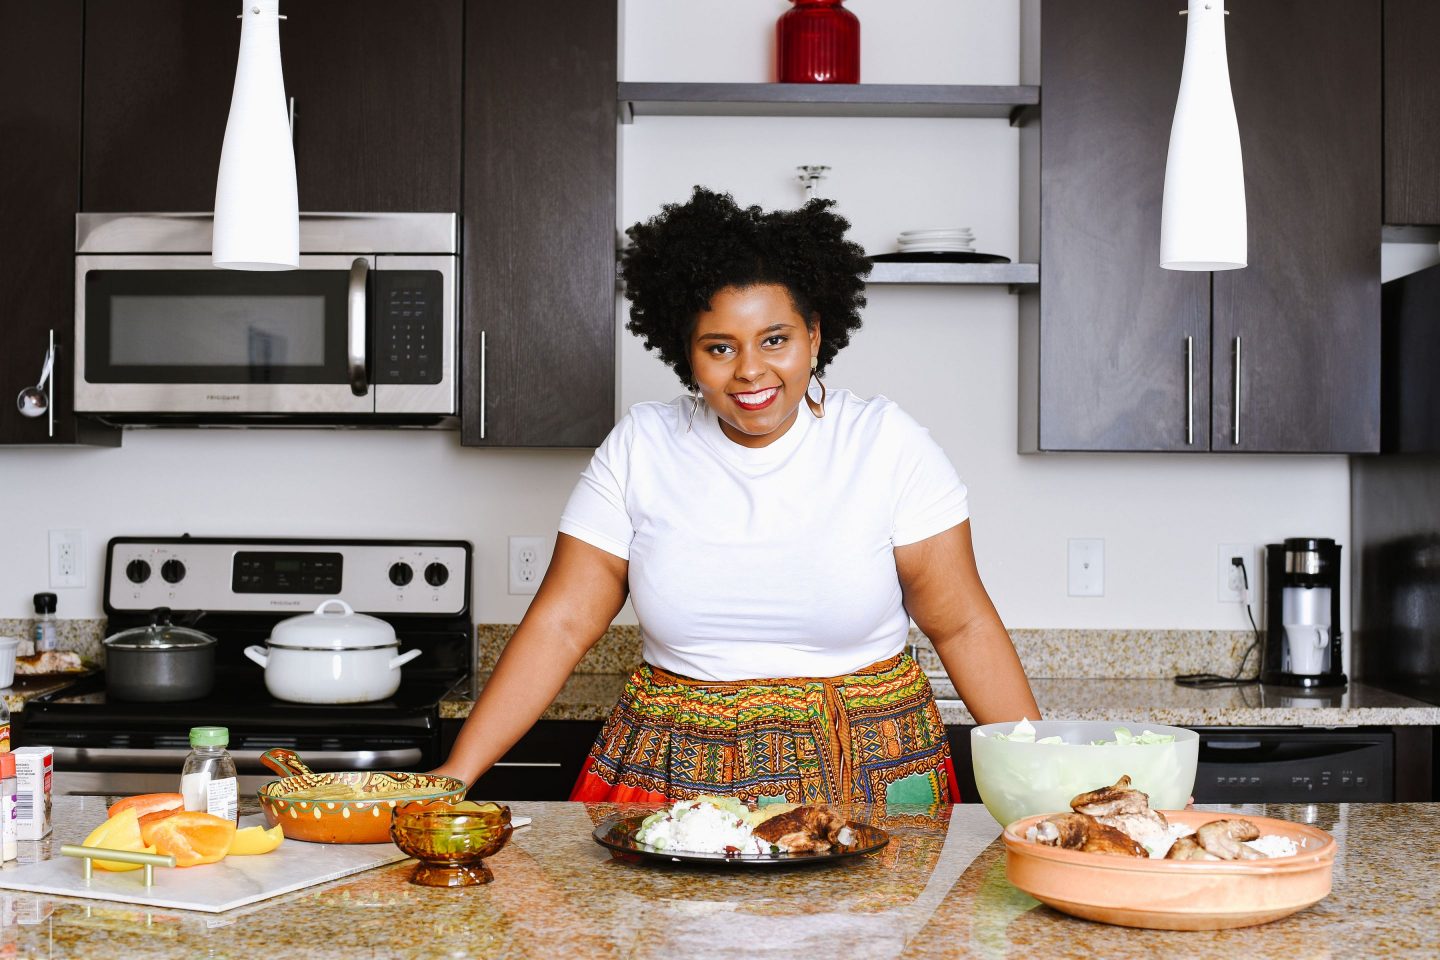 North Carolina Chef Gives 3 Tips for Making Cooking at Home Easier